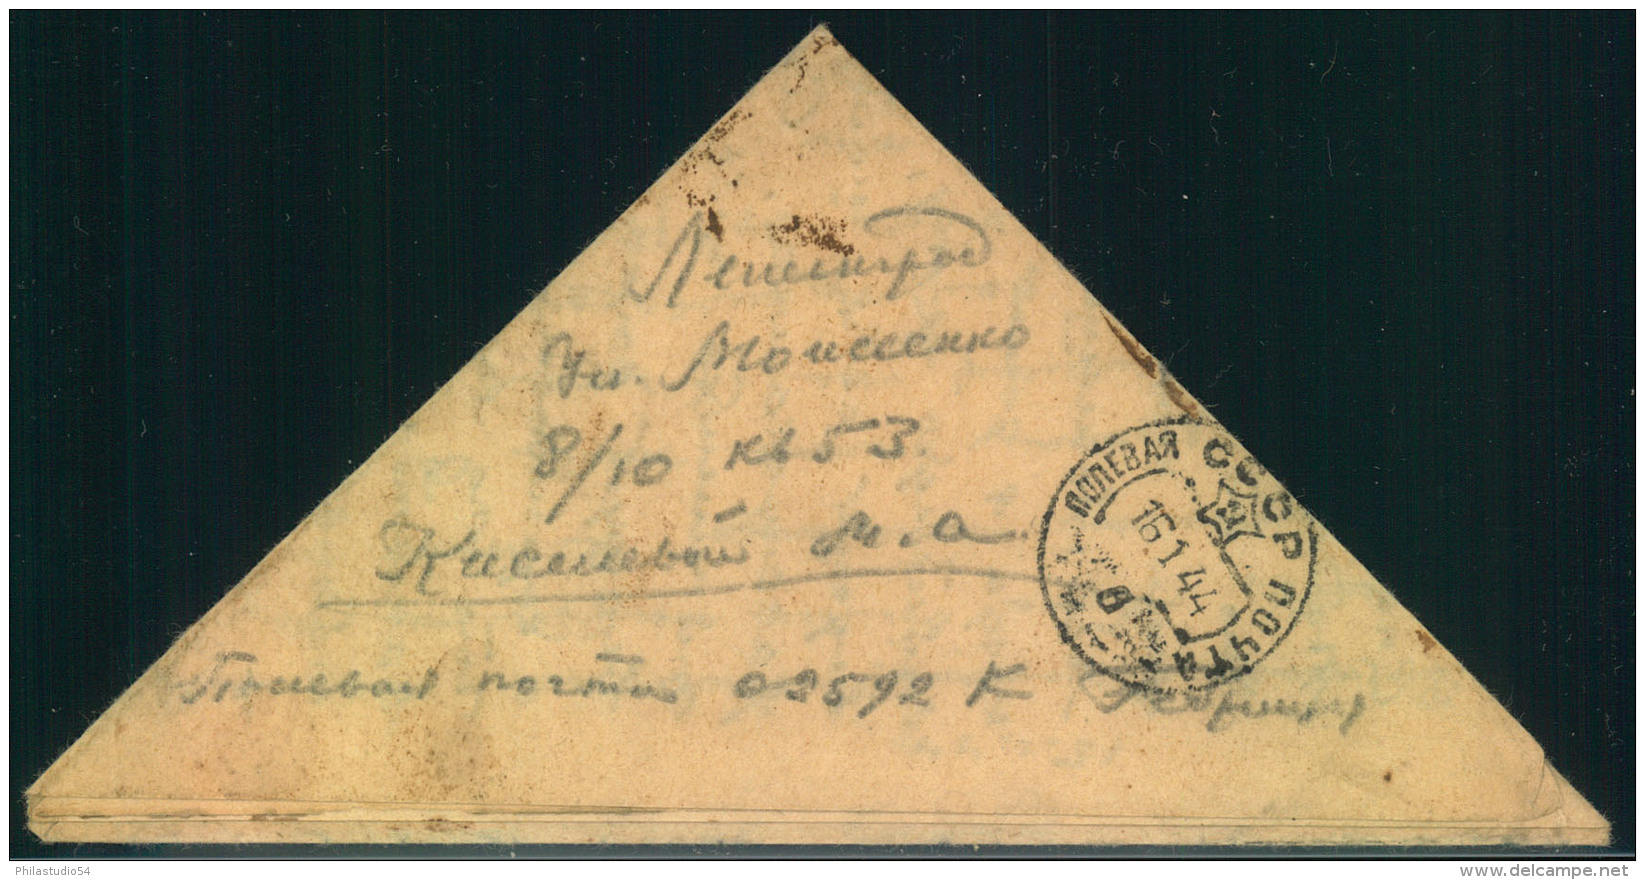 1944, Triangular Fieldpost Letter From A Soldier Of 23 Rd Army WITH CENSOR SENT TO Leningrade: - Lettres & Documents